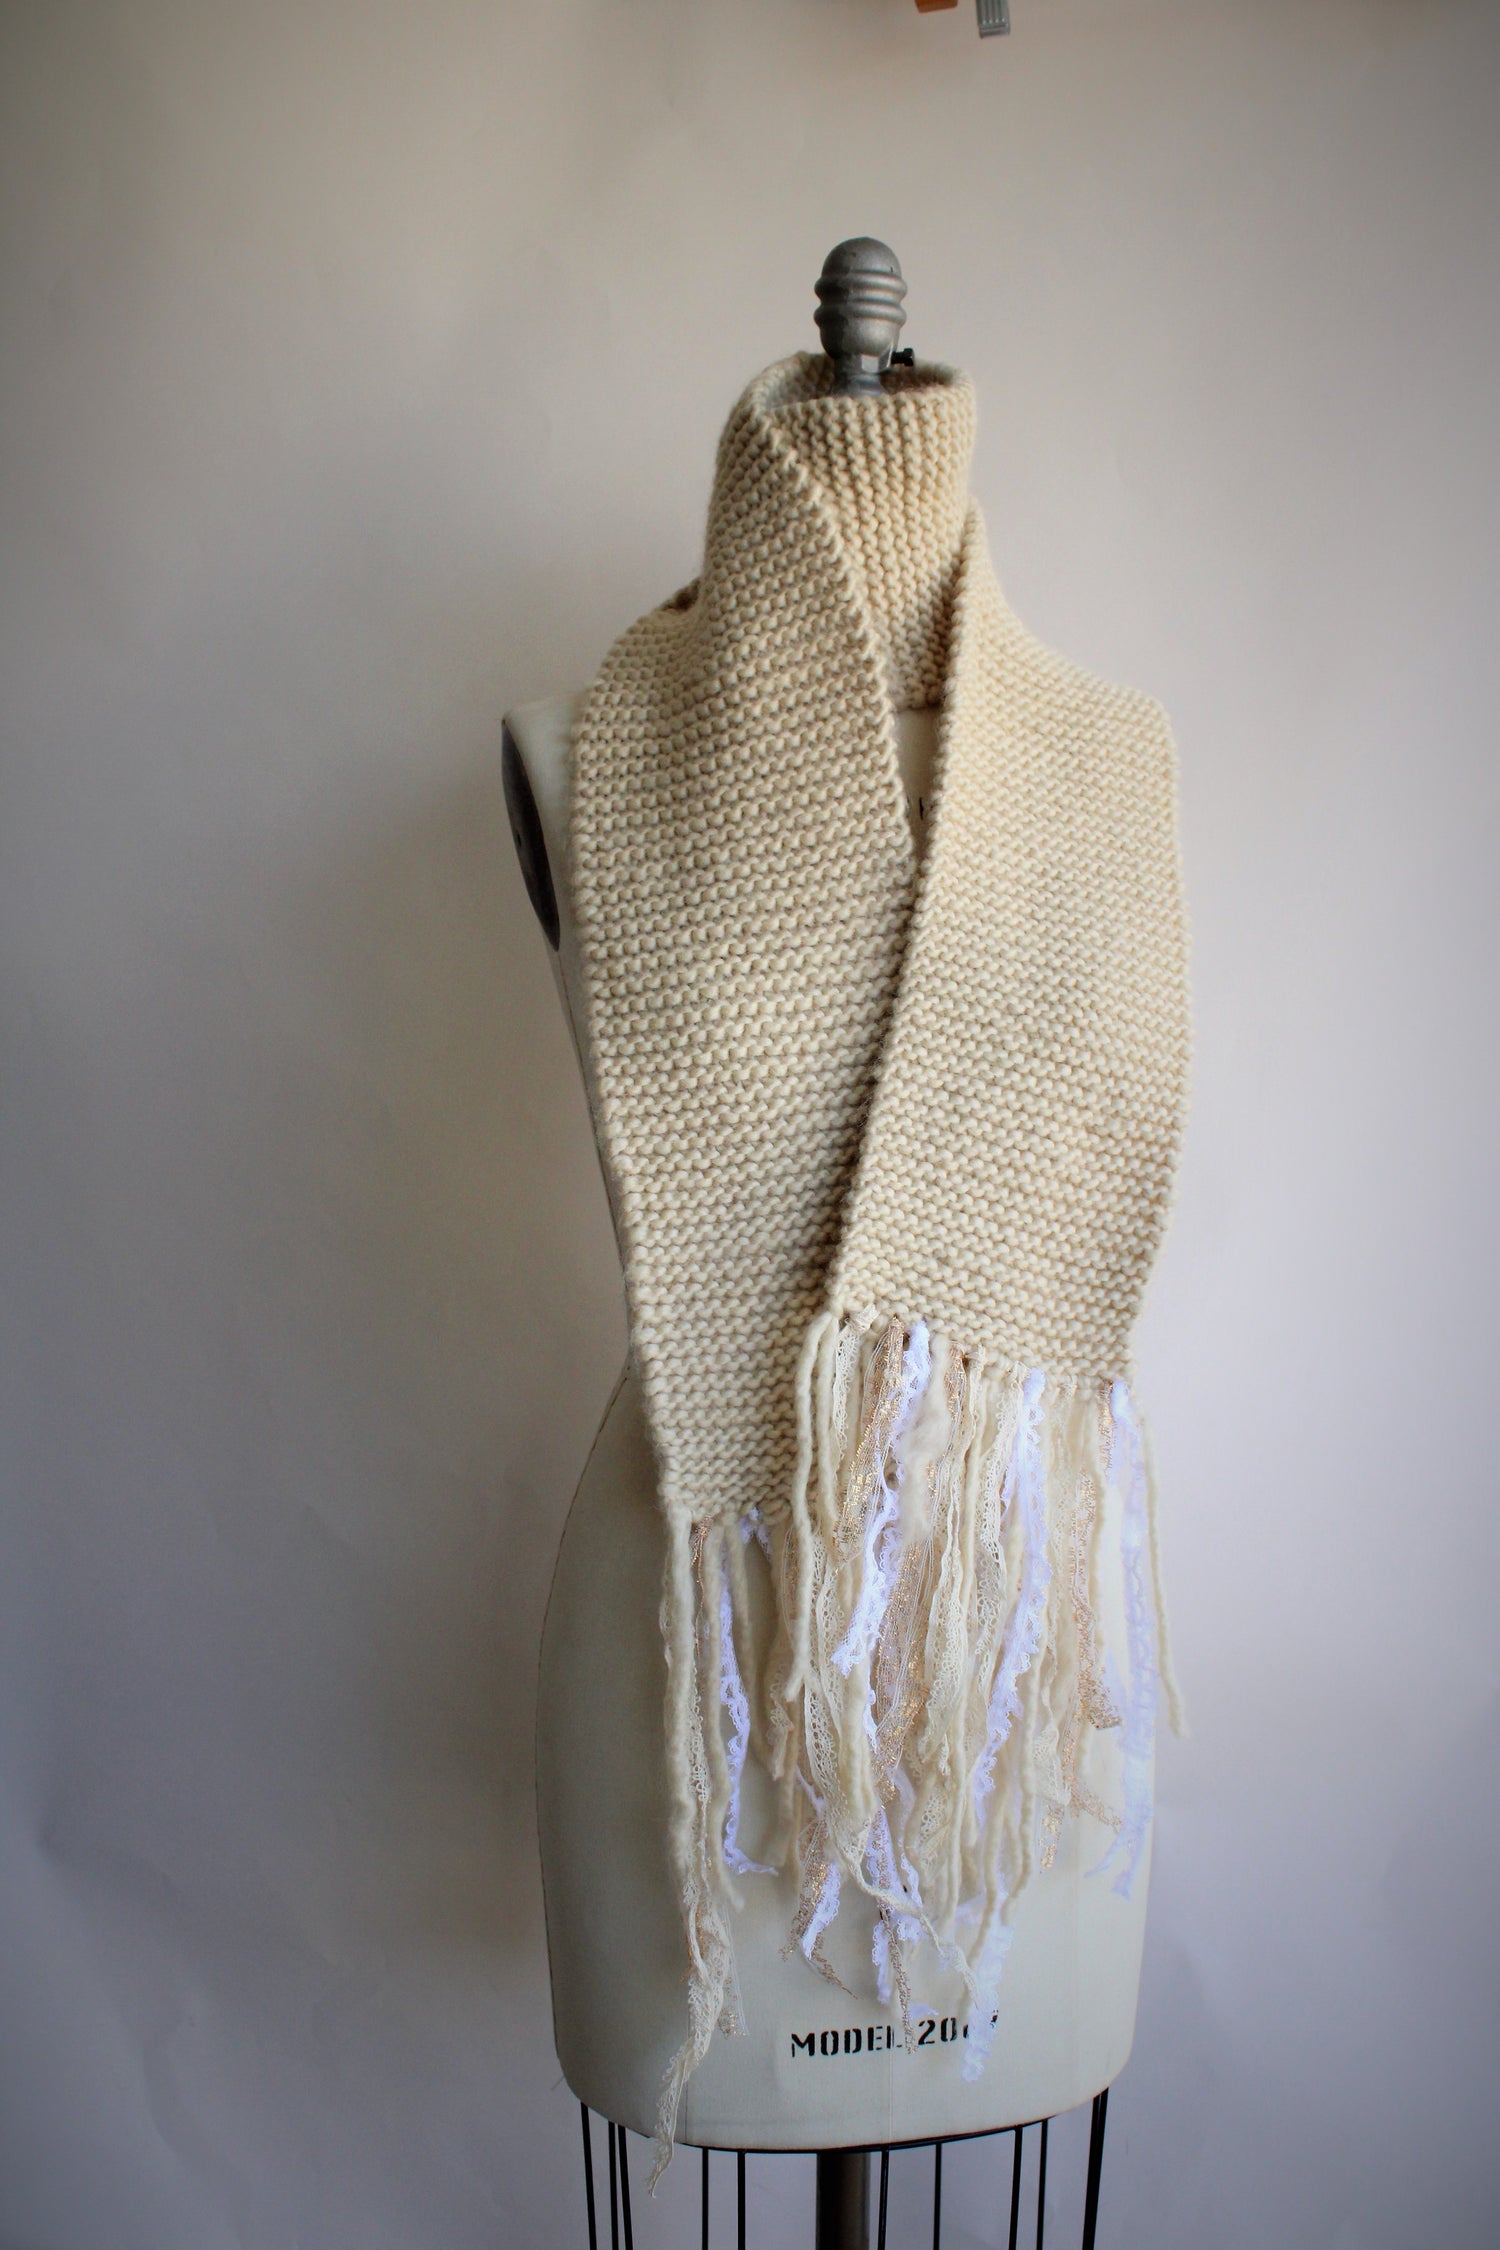 The "Fawn" Cream Knit Scarf with Vintage Lace Fringe